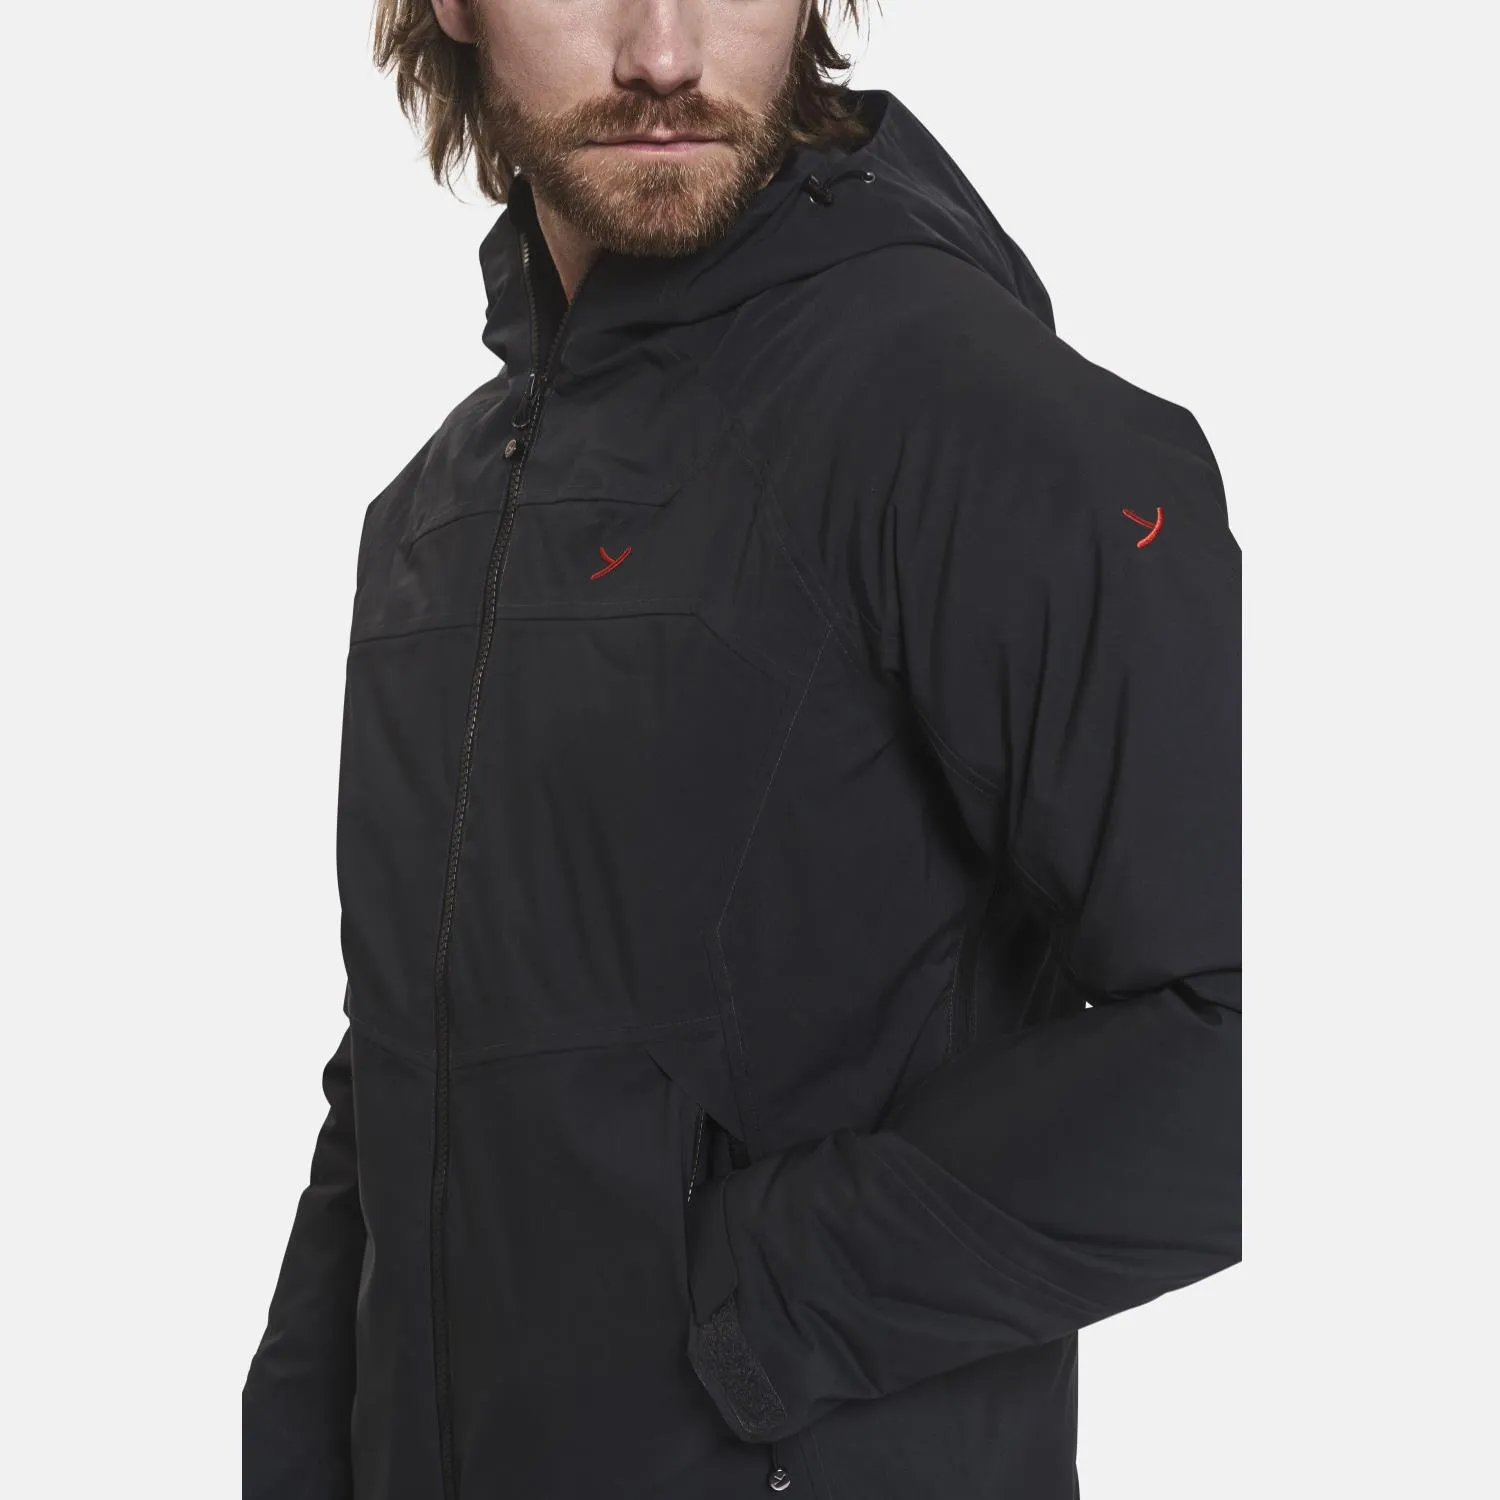 Reese-1112-mens-down-insulated-shell-jacket-Y-by-Nordisk-black-model-05.jpg